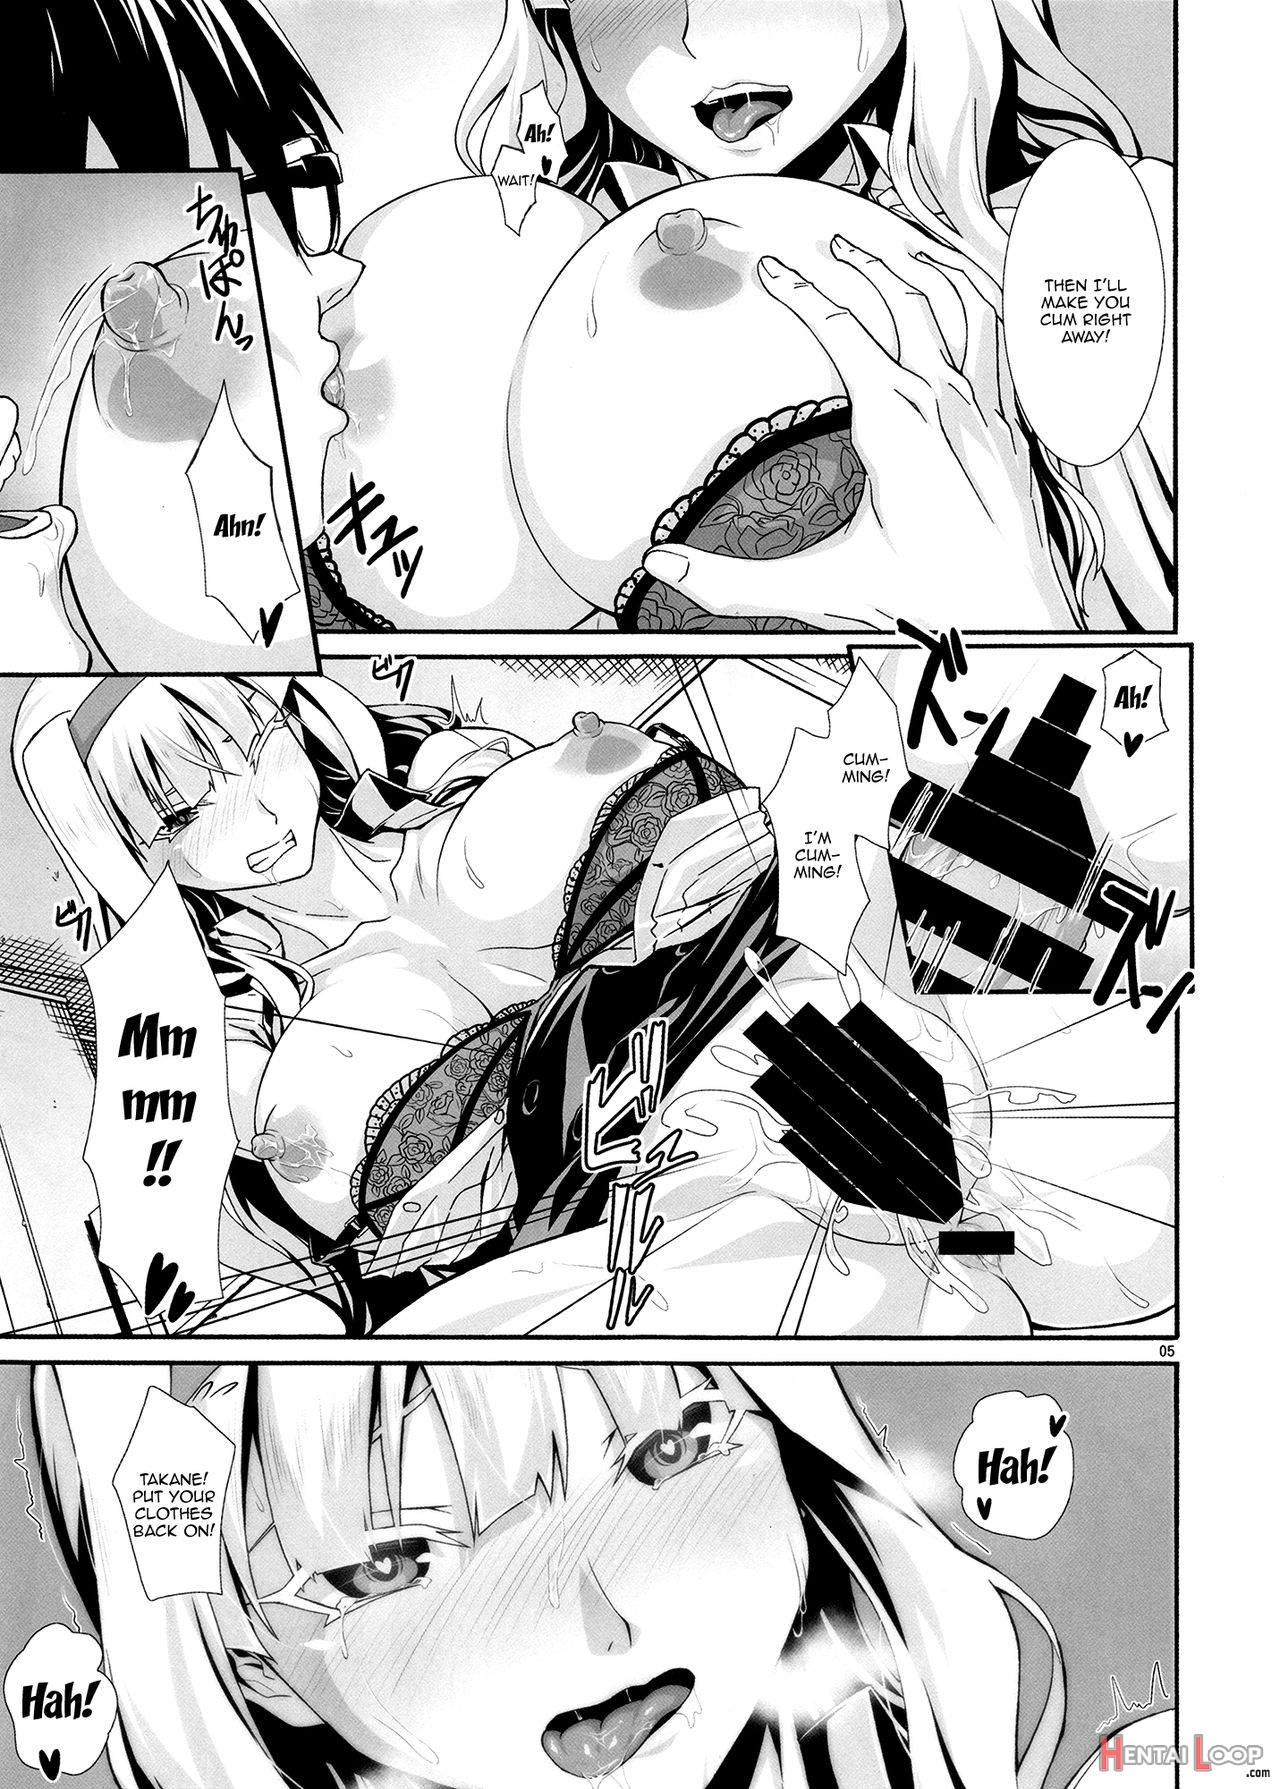 Angel's Stroke 114 Thick Takane page 6